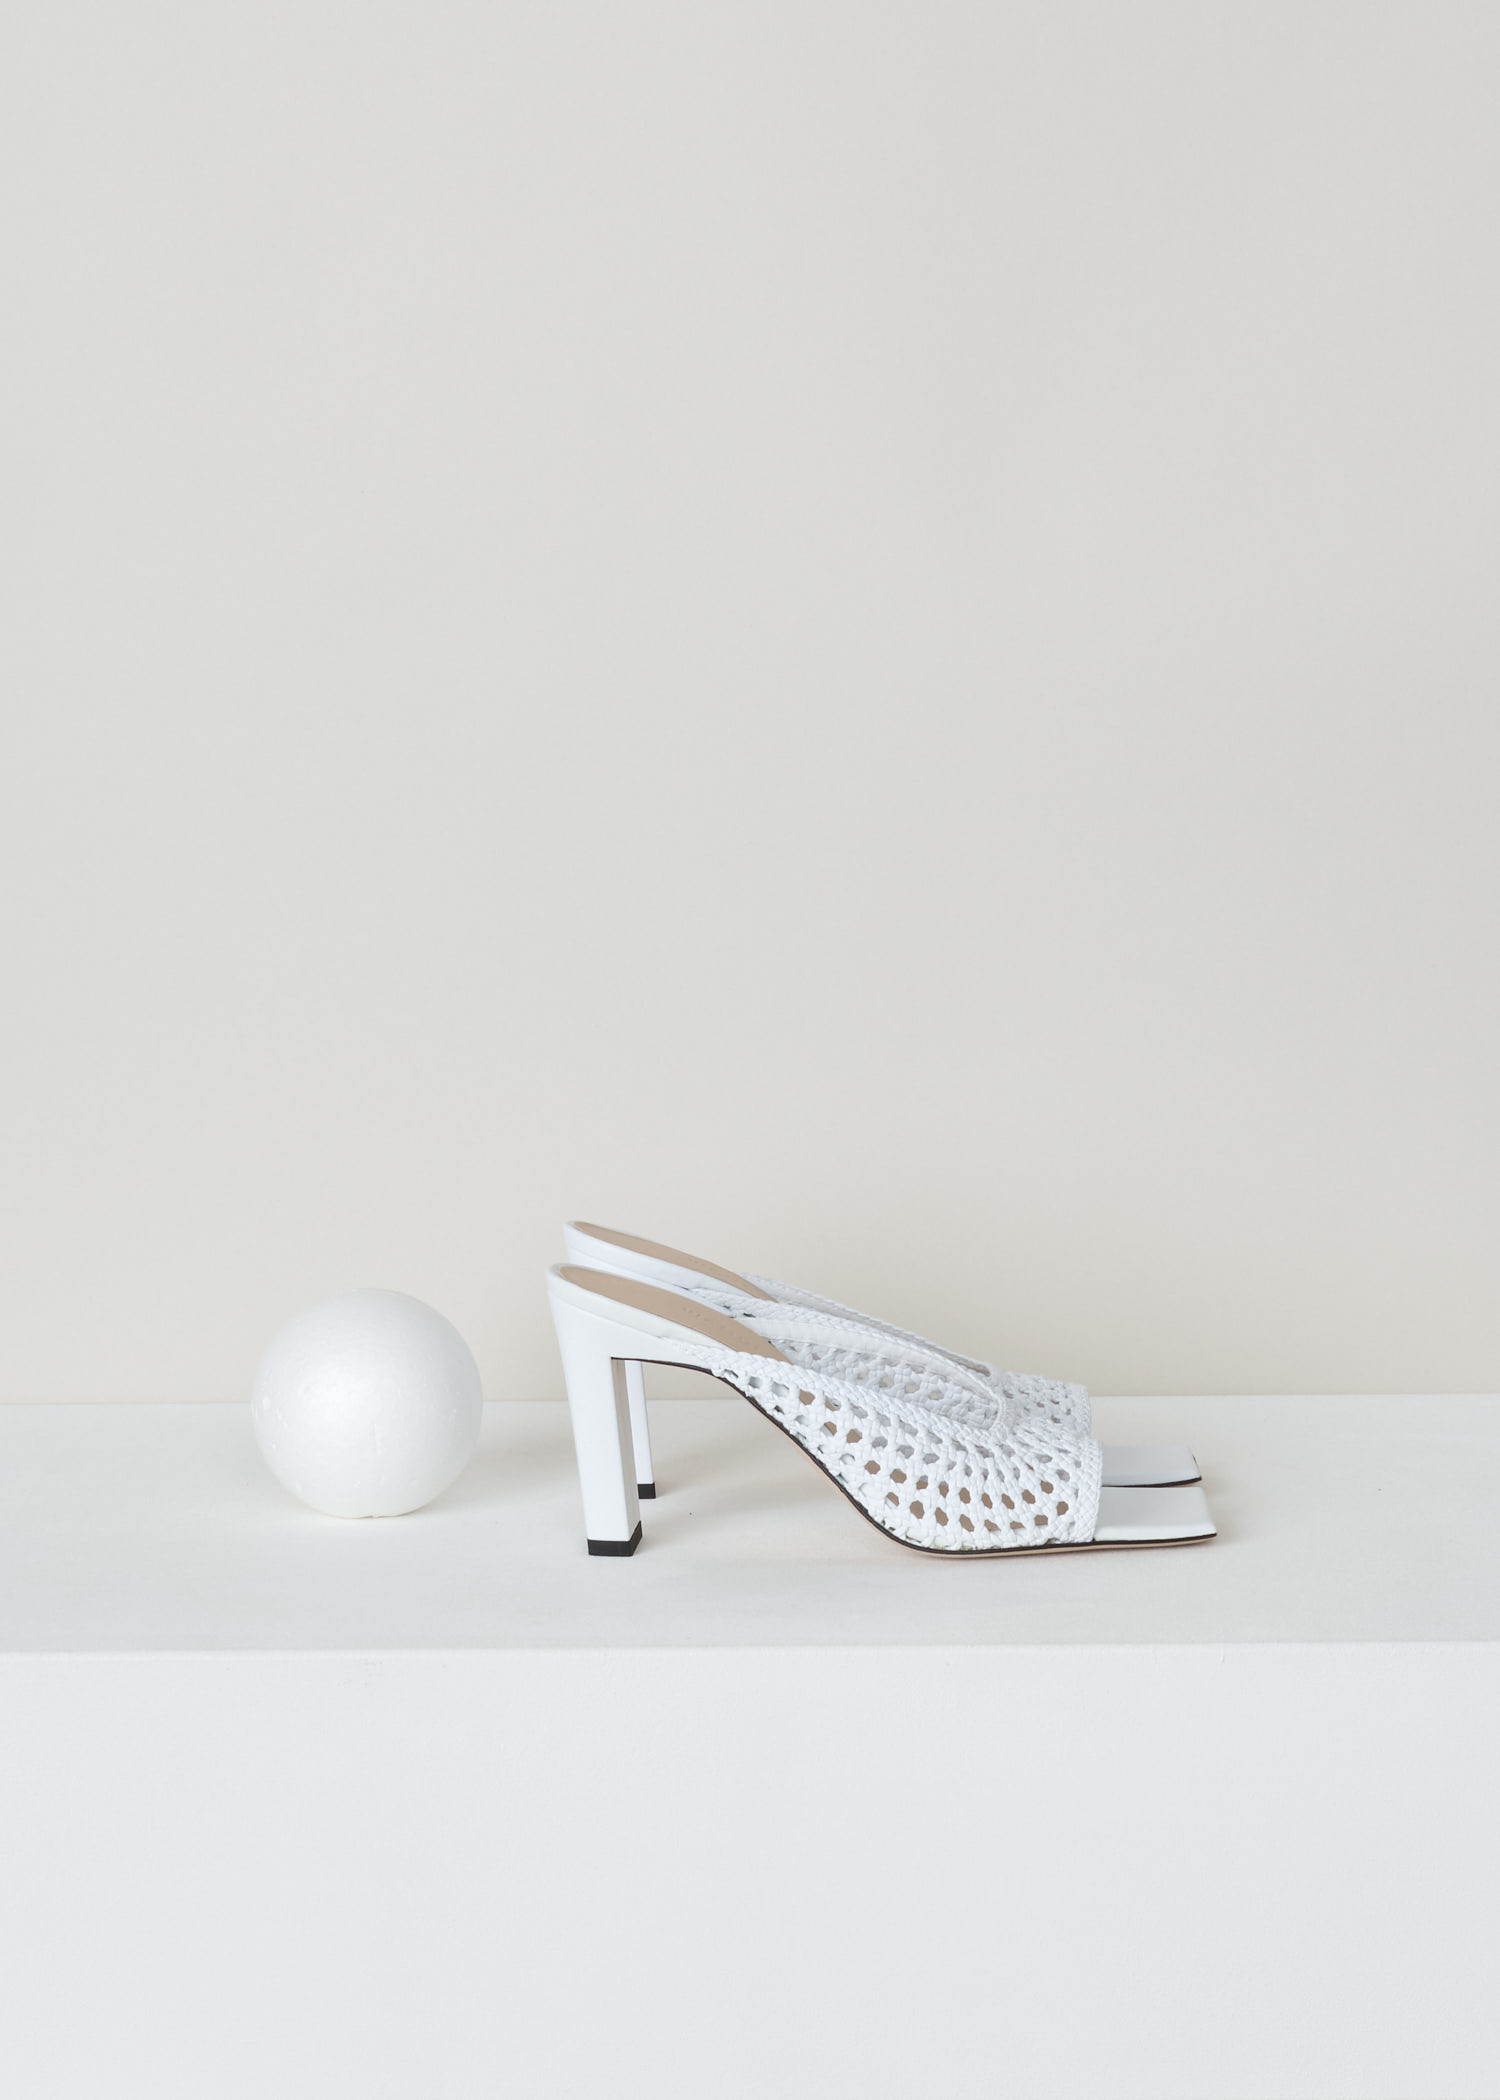 Wandler, White woven leather sandals, isa_sandal_mesh_white, white, side, White Wandler sandals made from together woven strands of lambskin, turned into this beautiful mesh. This model comes with square-cut toes, and leather soles.

heel height: 9 cm / 3.5 inch  